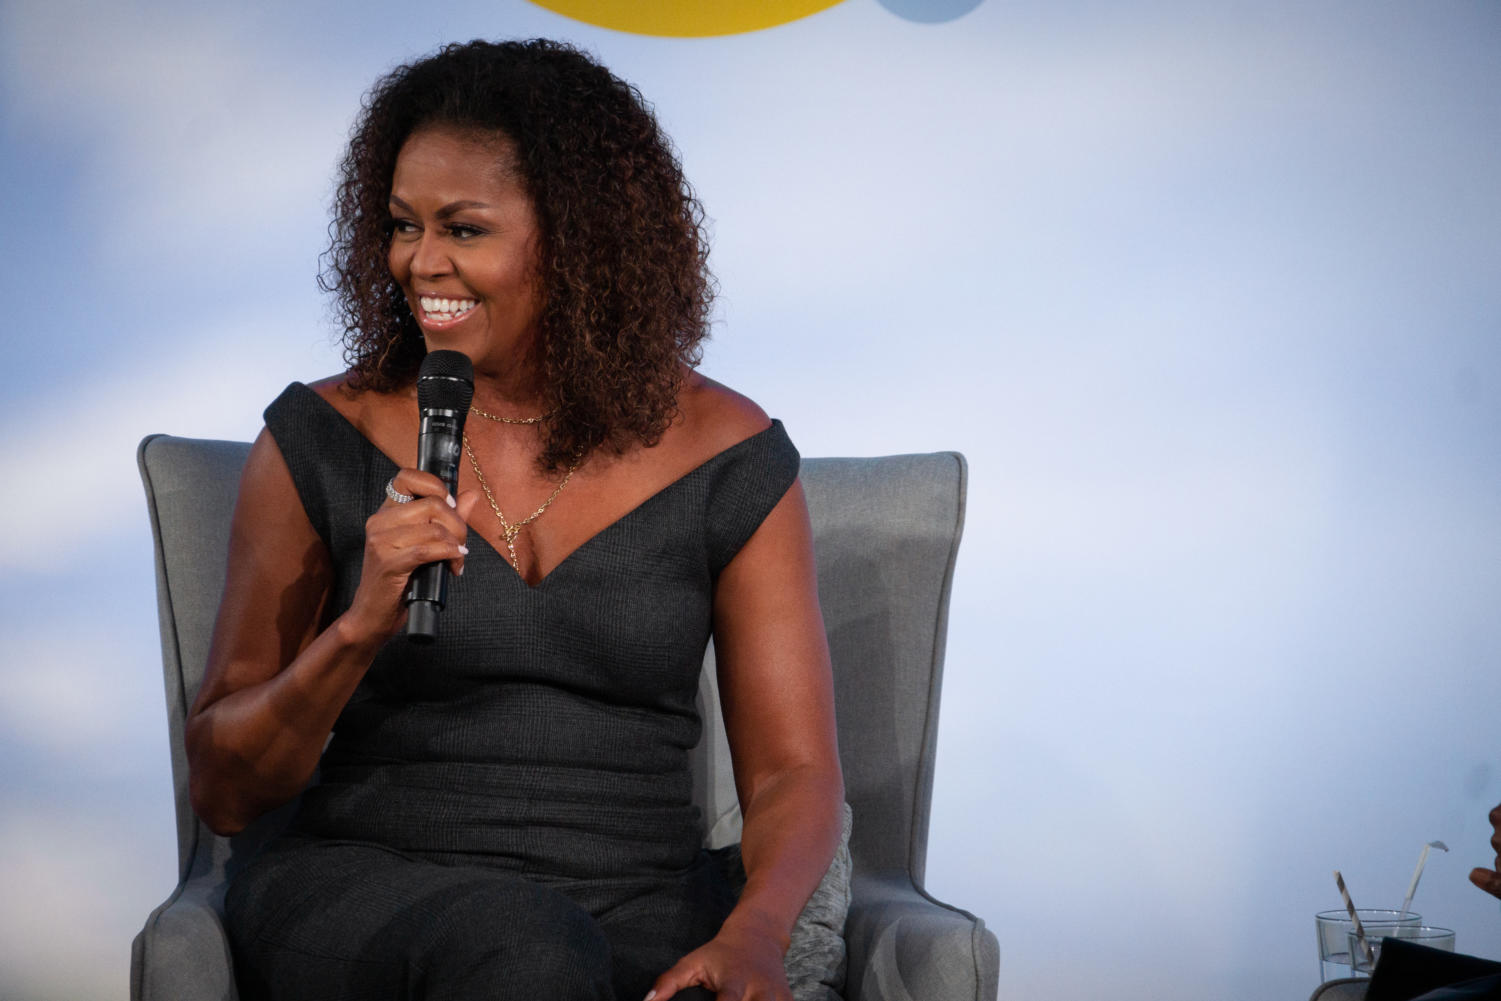 Michelle Obama began the day in conversation with her brother, Craig Robinson.